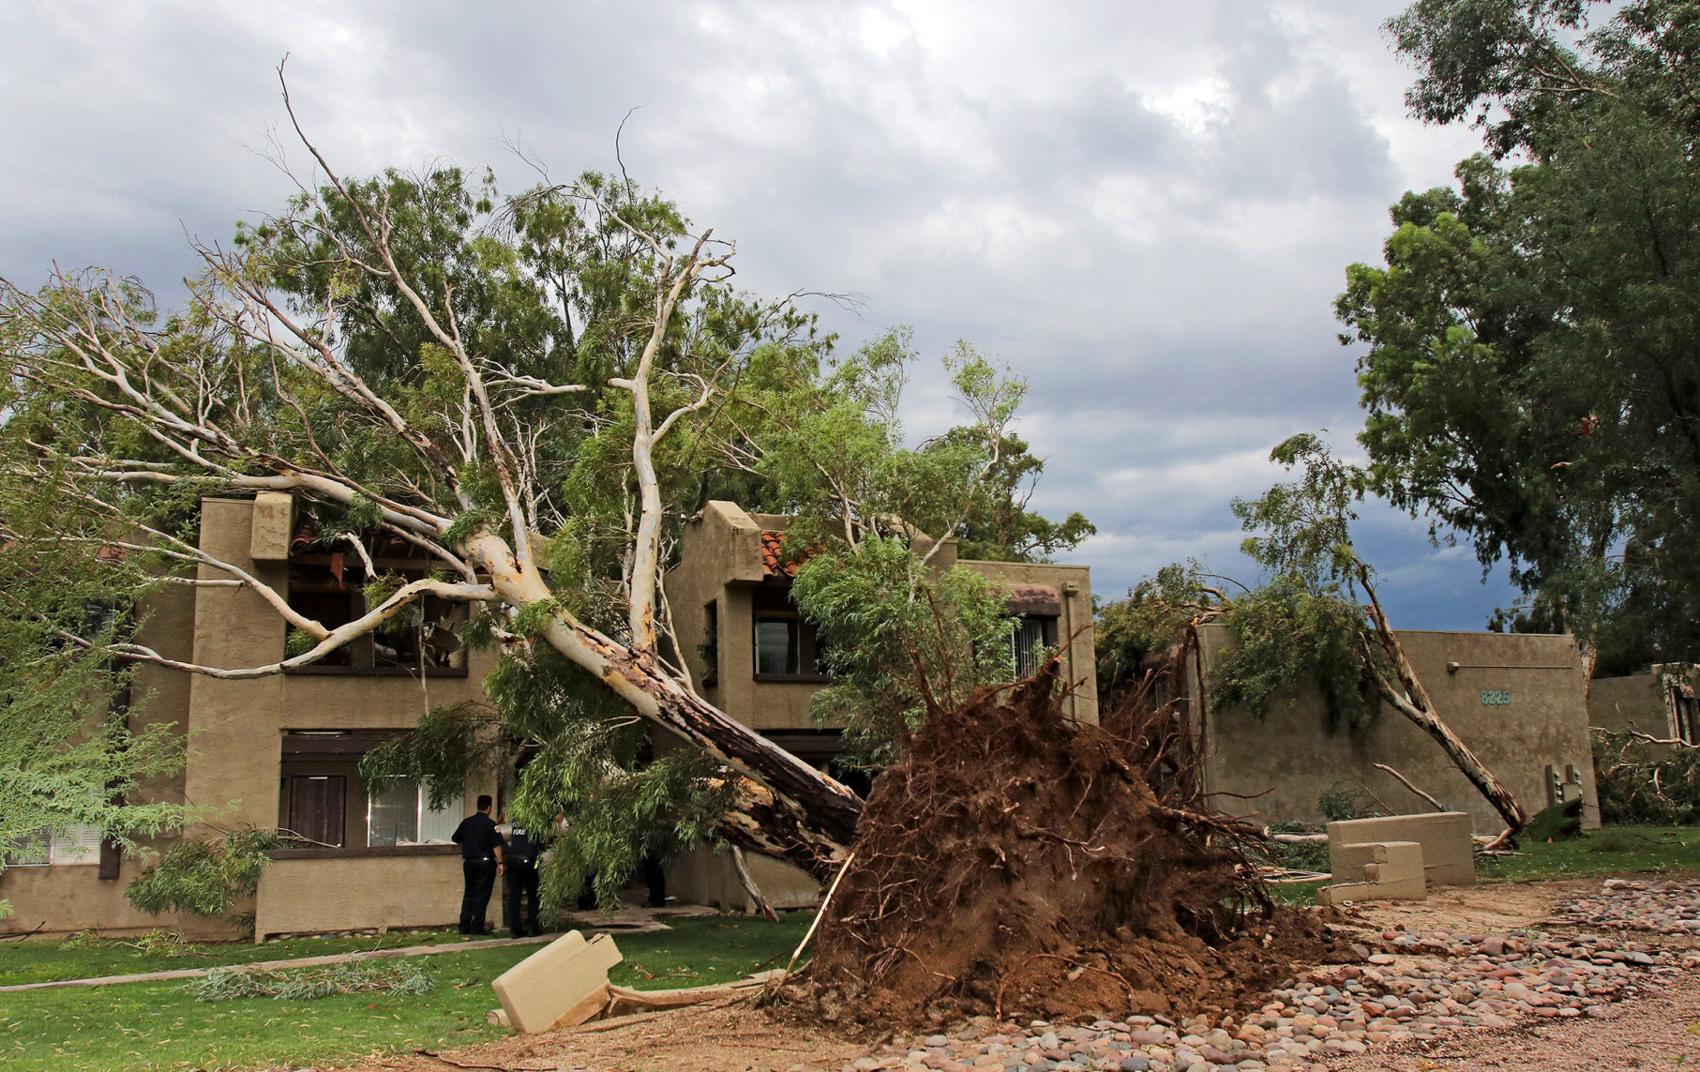 Microburst storm hits Tucson's east side, trees collapse at apartments